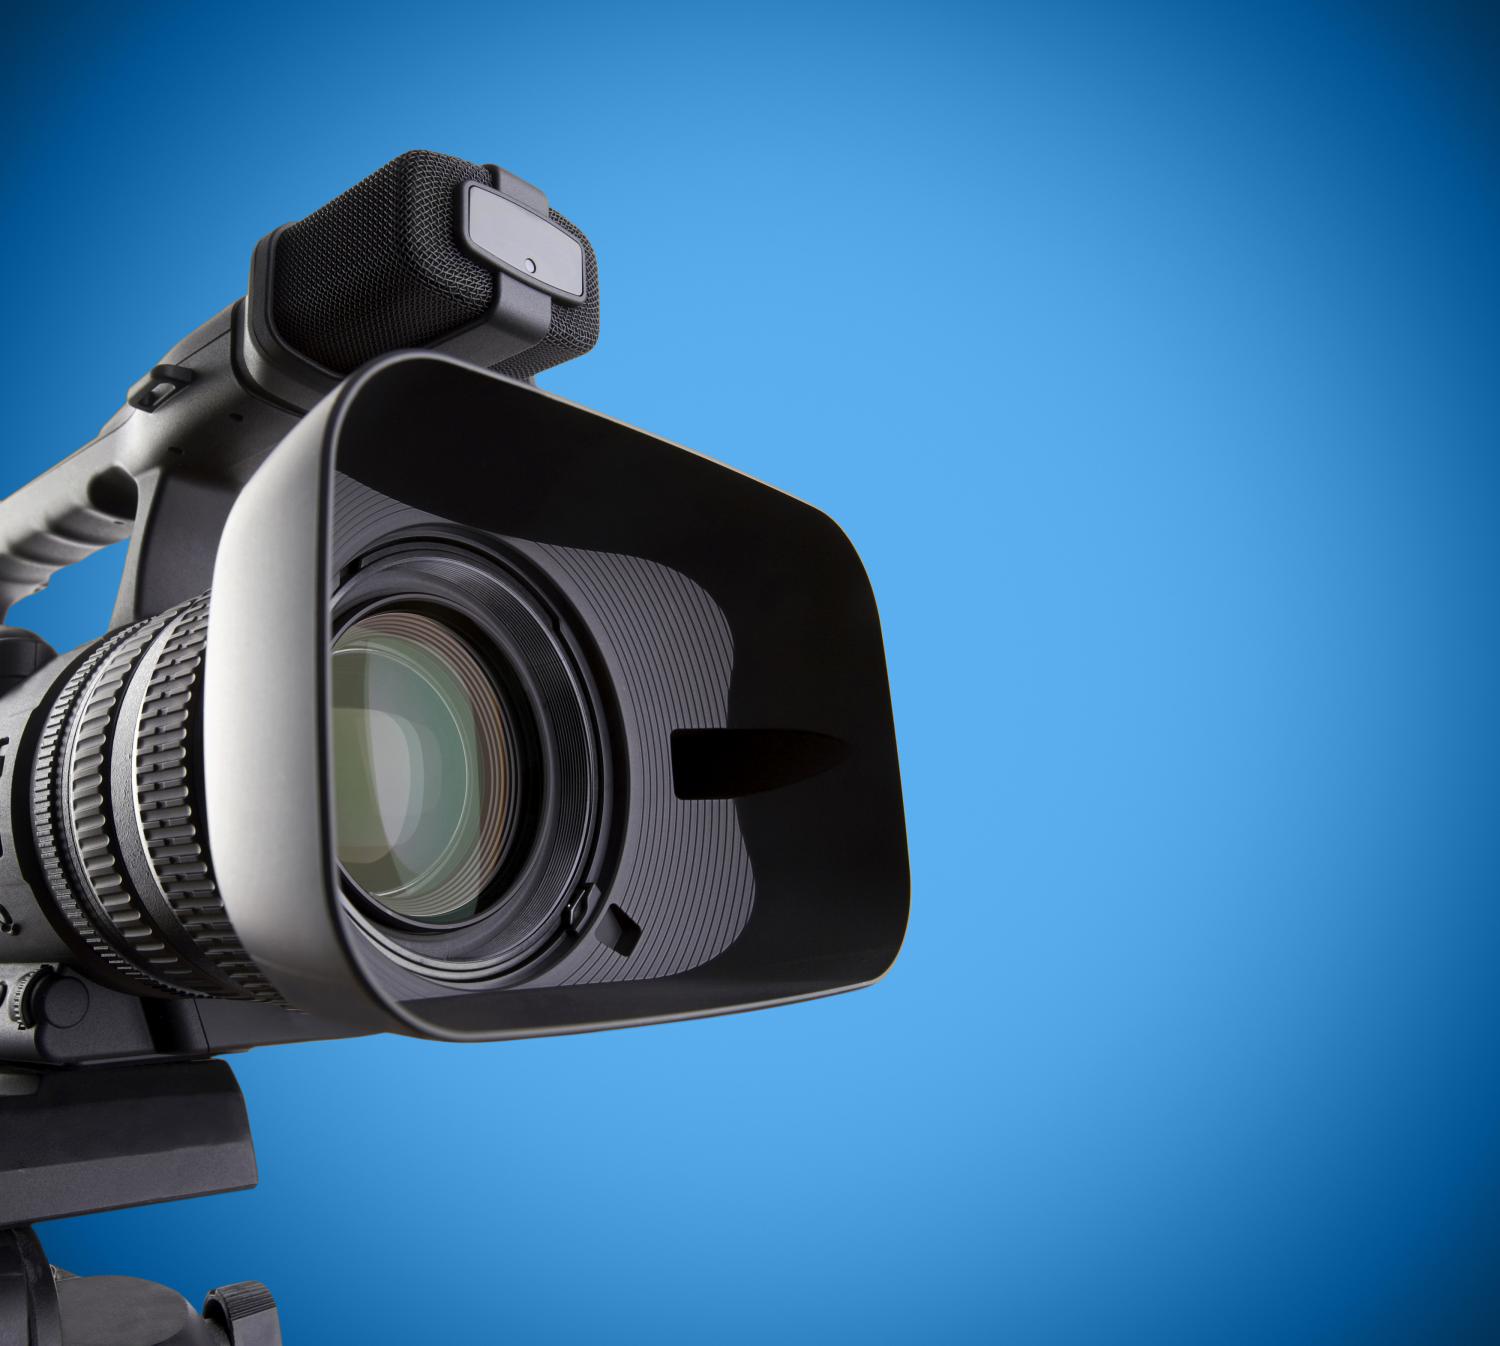 View of the lens of a professional news camera with microphone